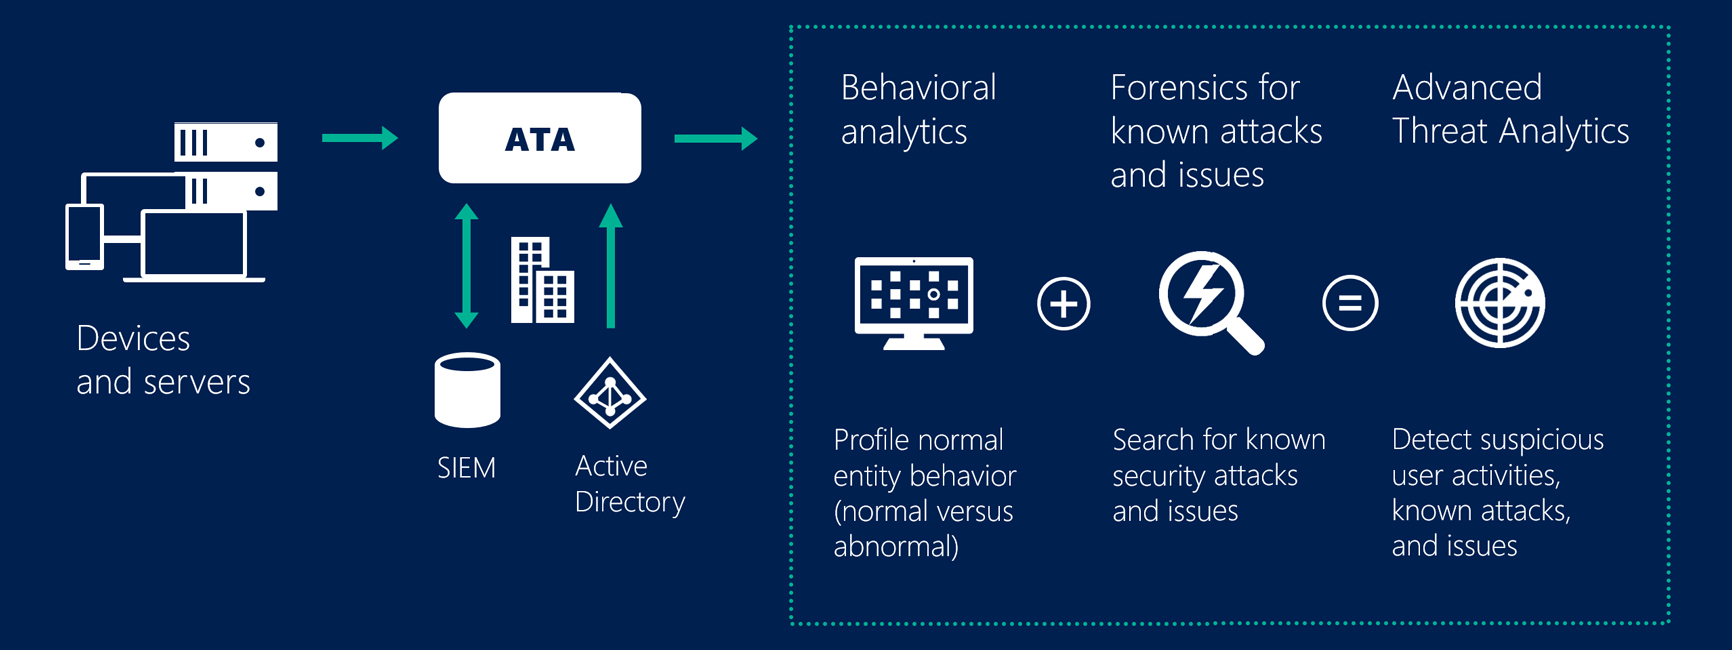 Infographic showing how Microsoft Advanced Threat Analytics protects devices and servers with behavioral analytics and scanning for known attacks